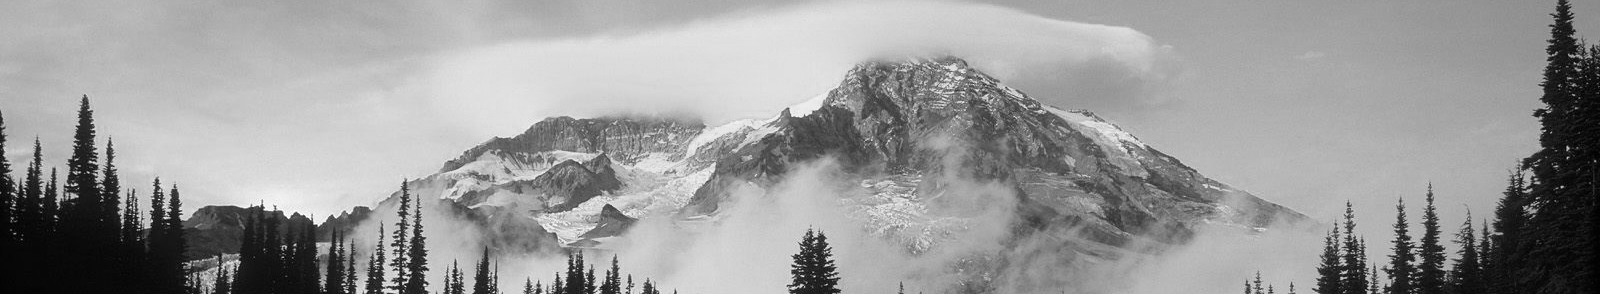 mount-rainier-cropped-wide-black-and-white